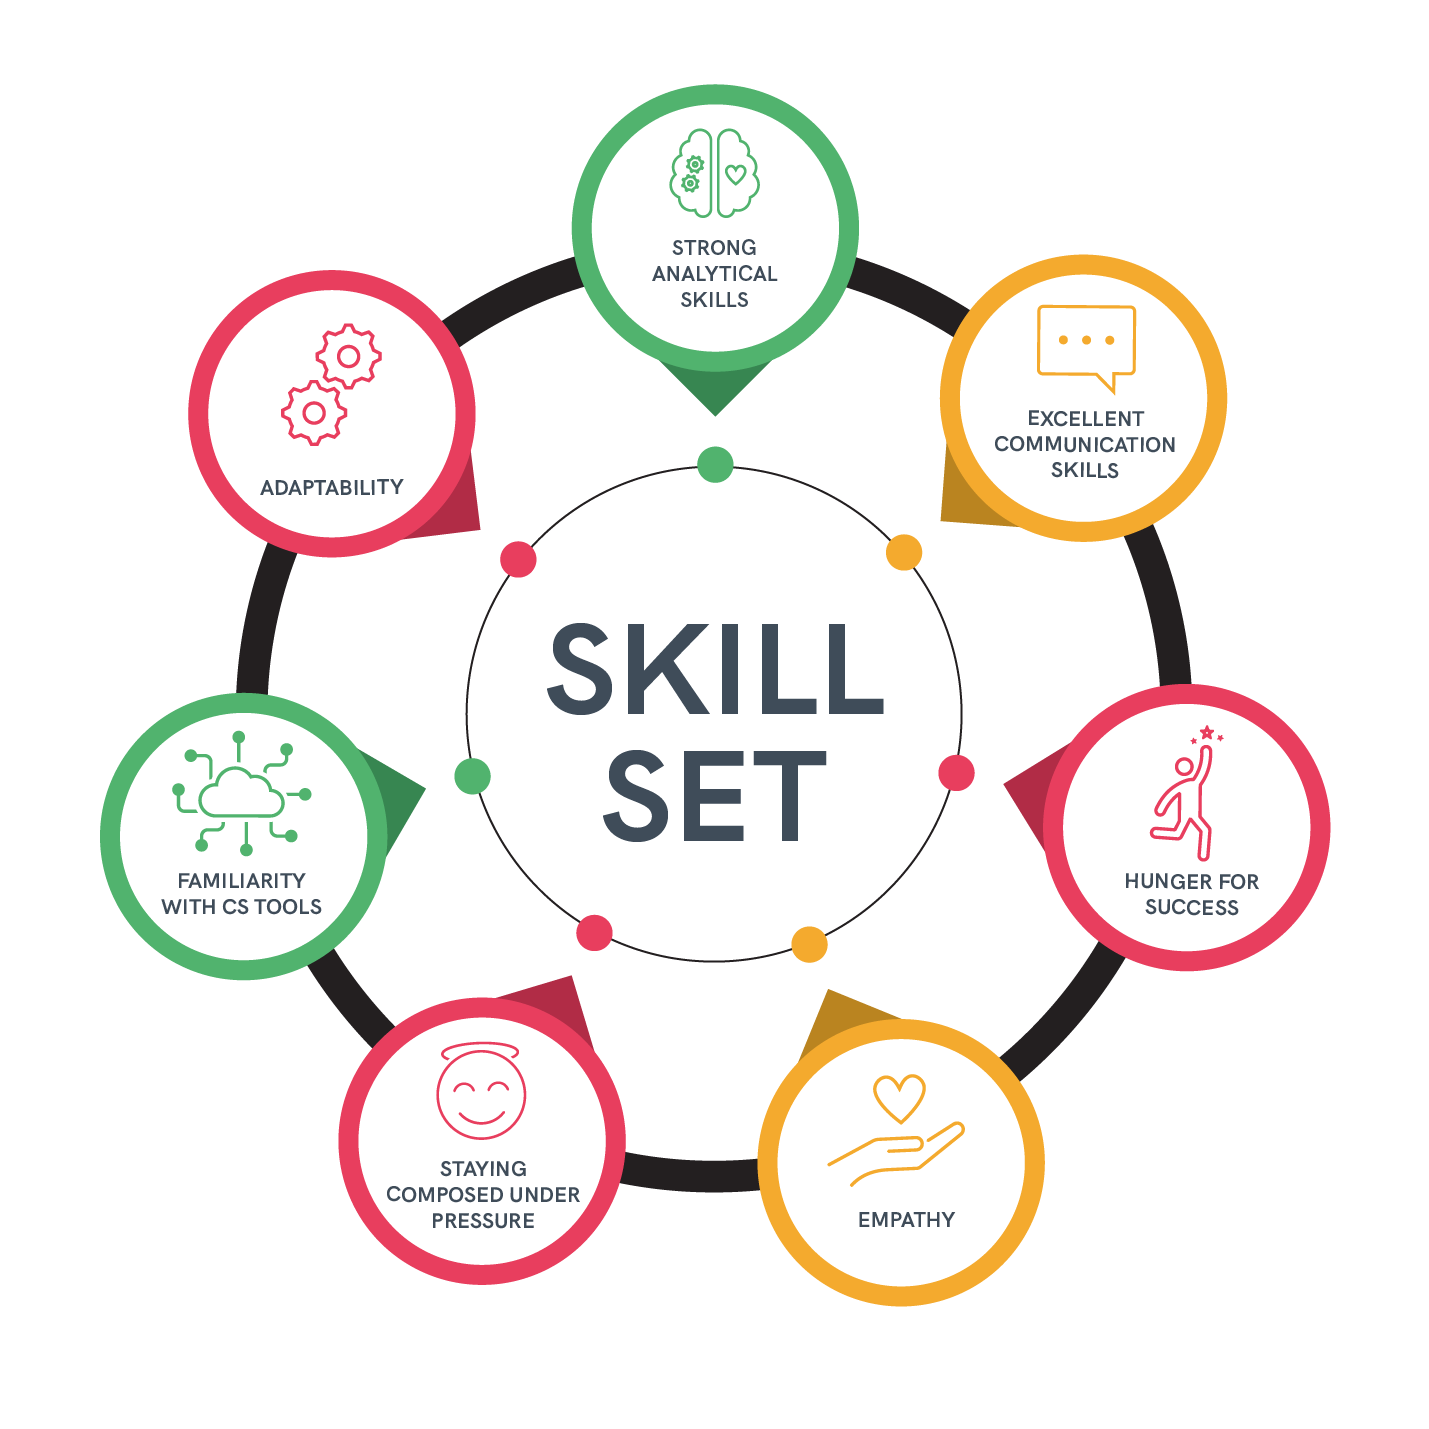 An infographic to show the skill set required for a professional looking for a customer success career